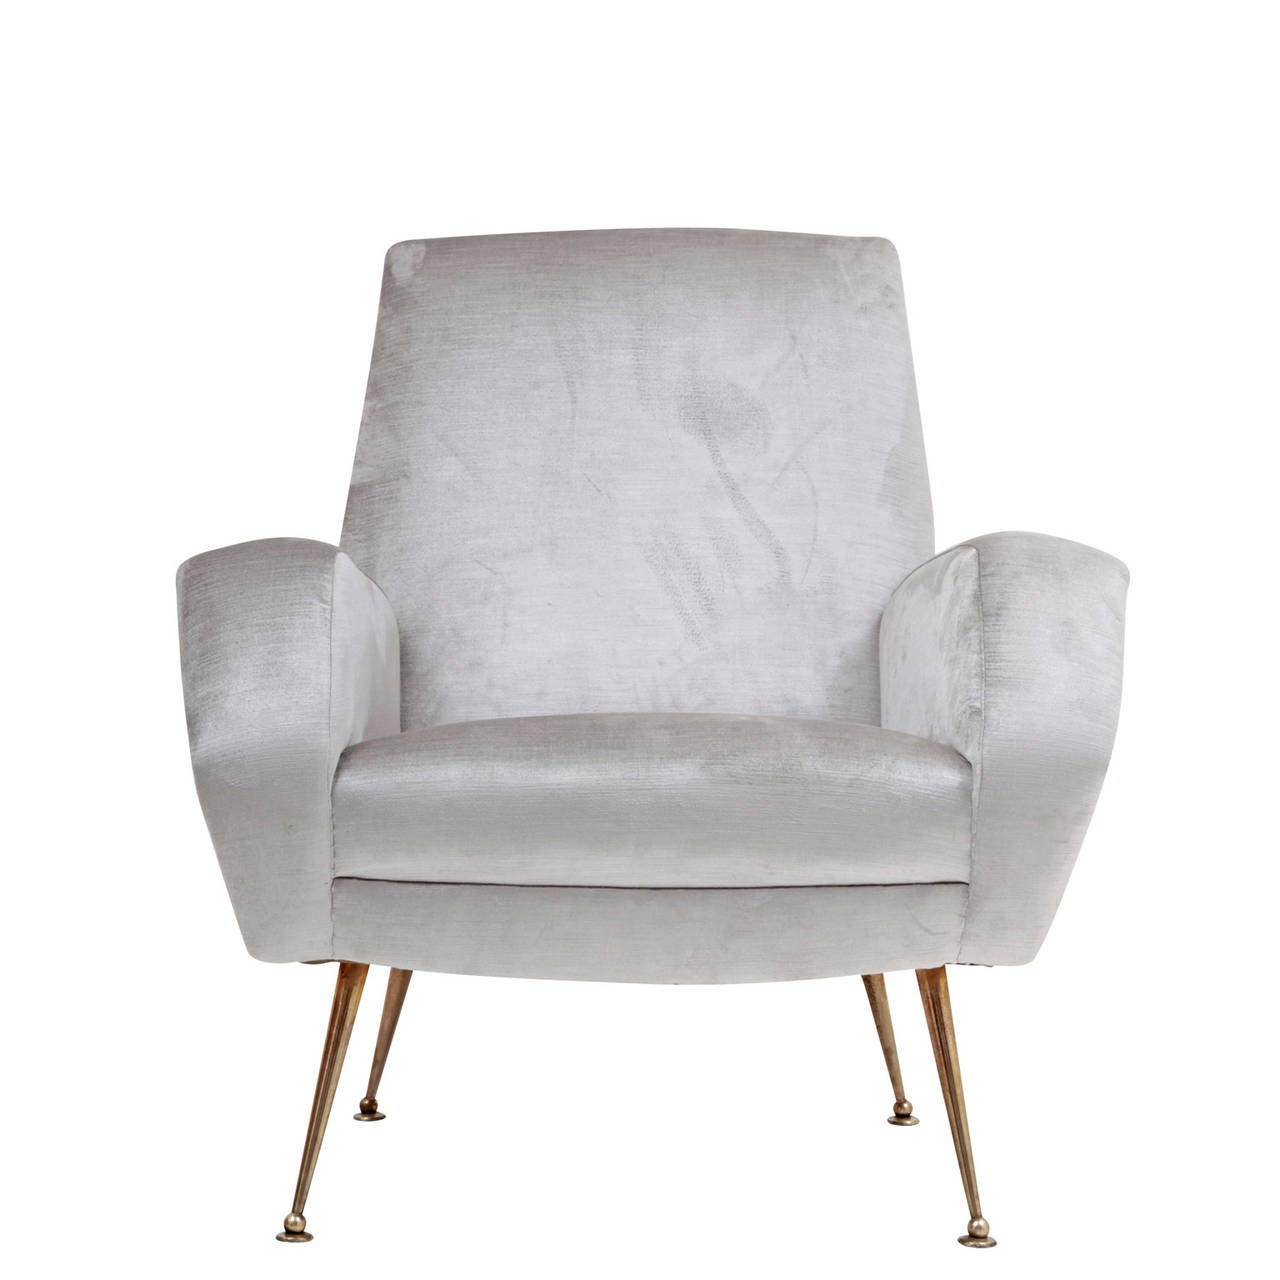 Very nice Italian Armchair from the 1970s. The chair stands on four conical tapered legs with a silvery upholstery. The legs end in ball feet on a round disc. The backrest, seat and armrests are very prominent and contrast intriguingly with its thin